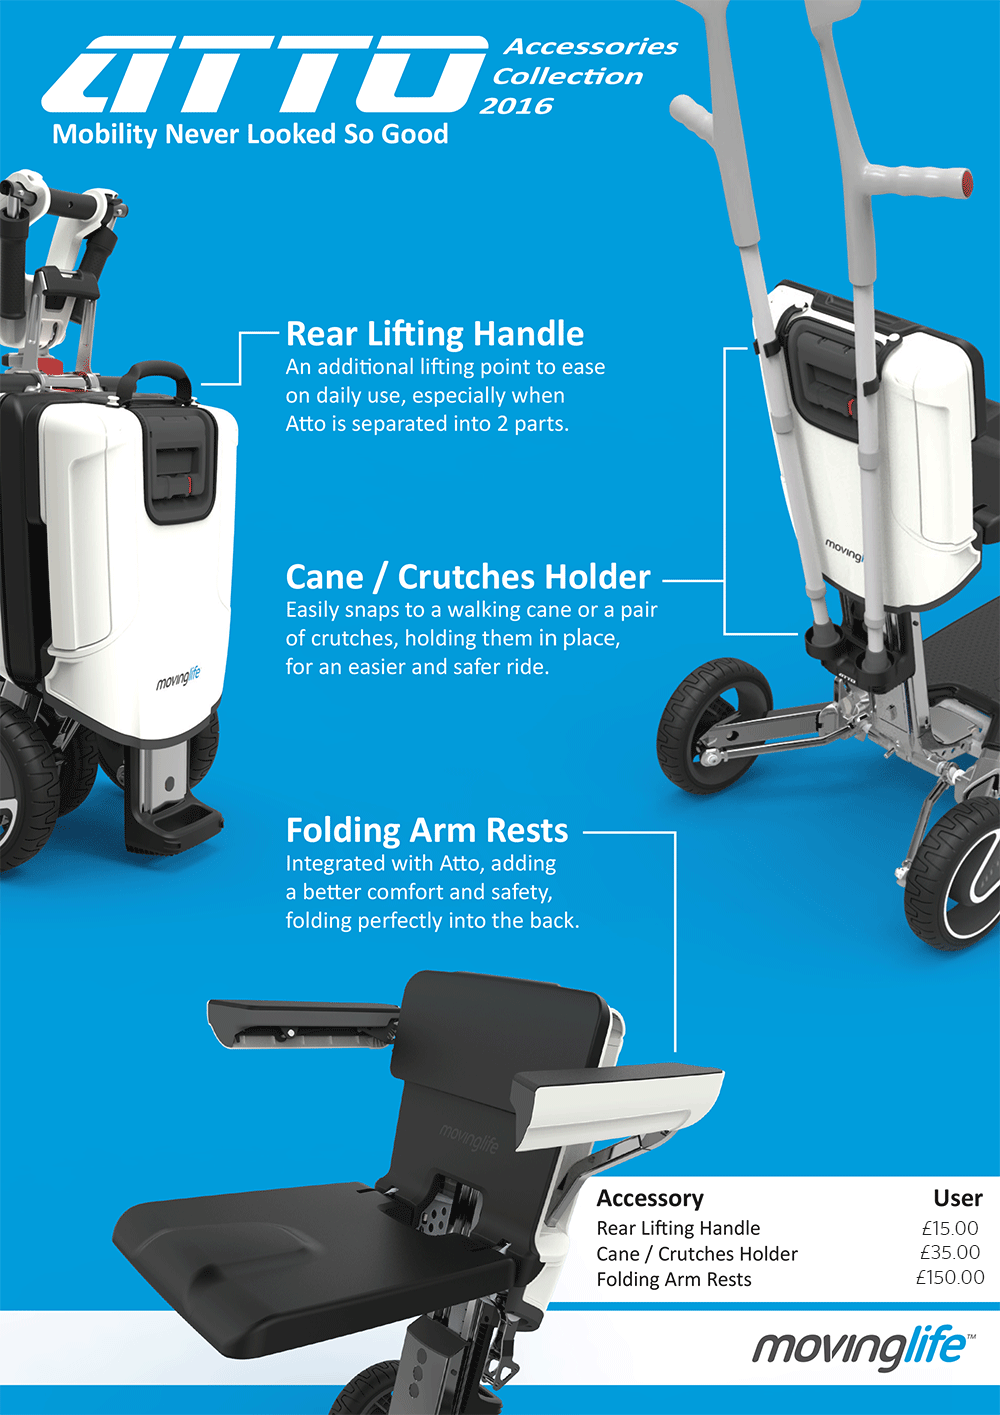 ATTO scooter now available with folding armrests, cane holder and rear lifting handle